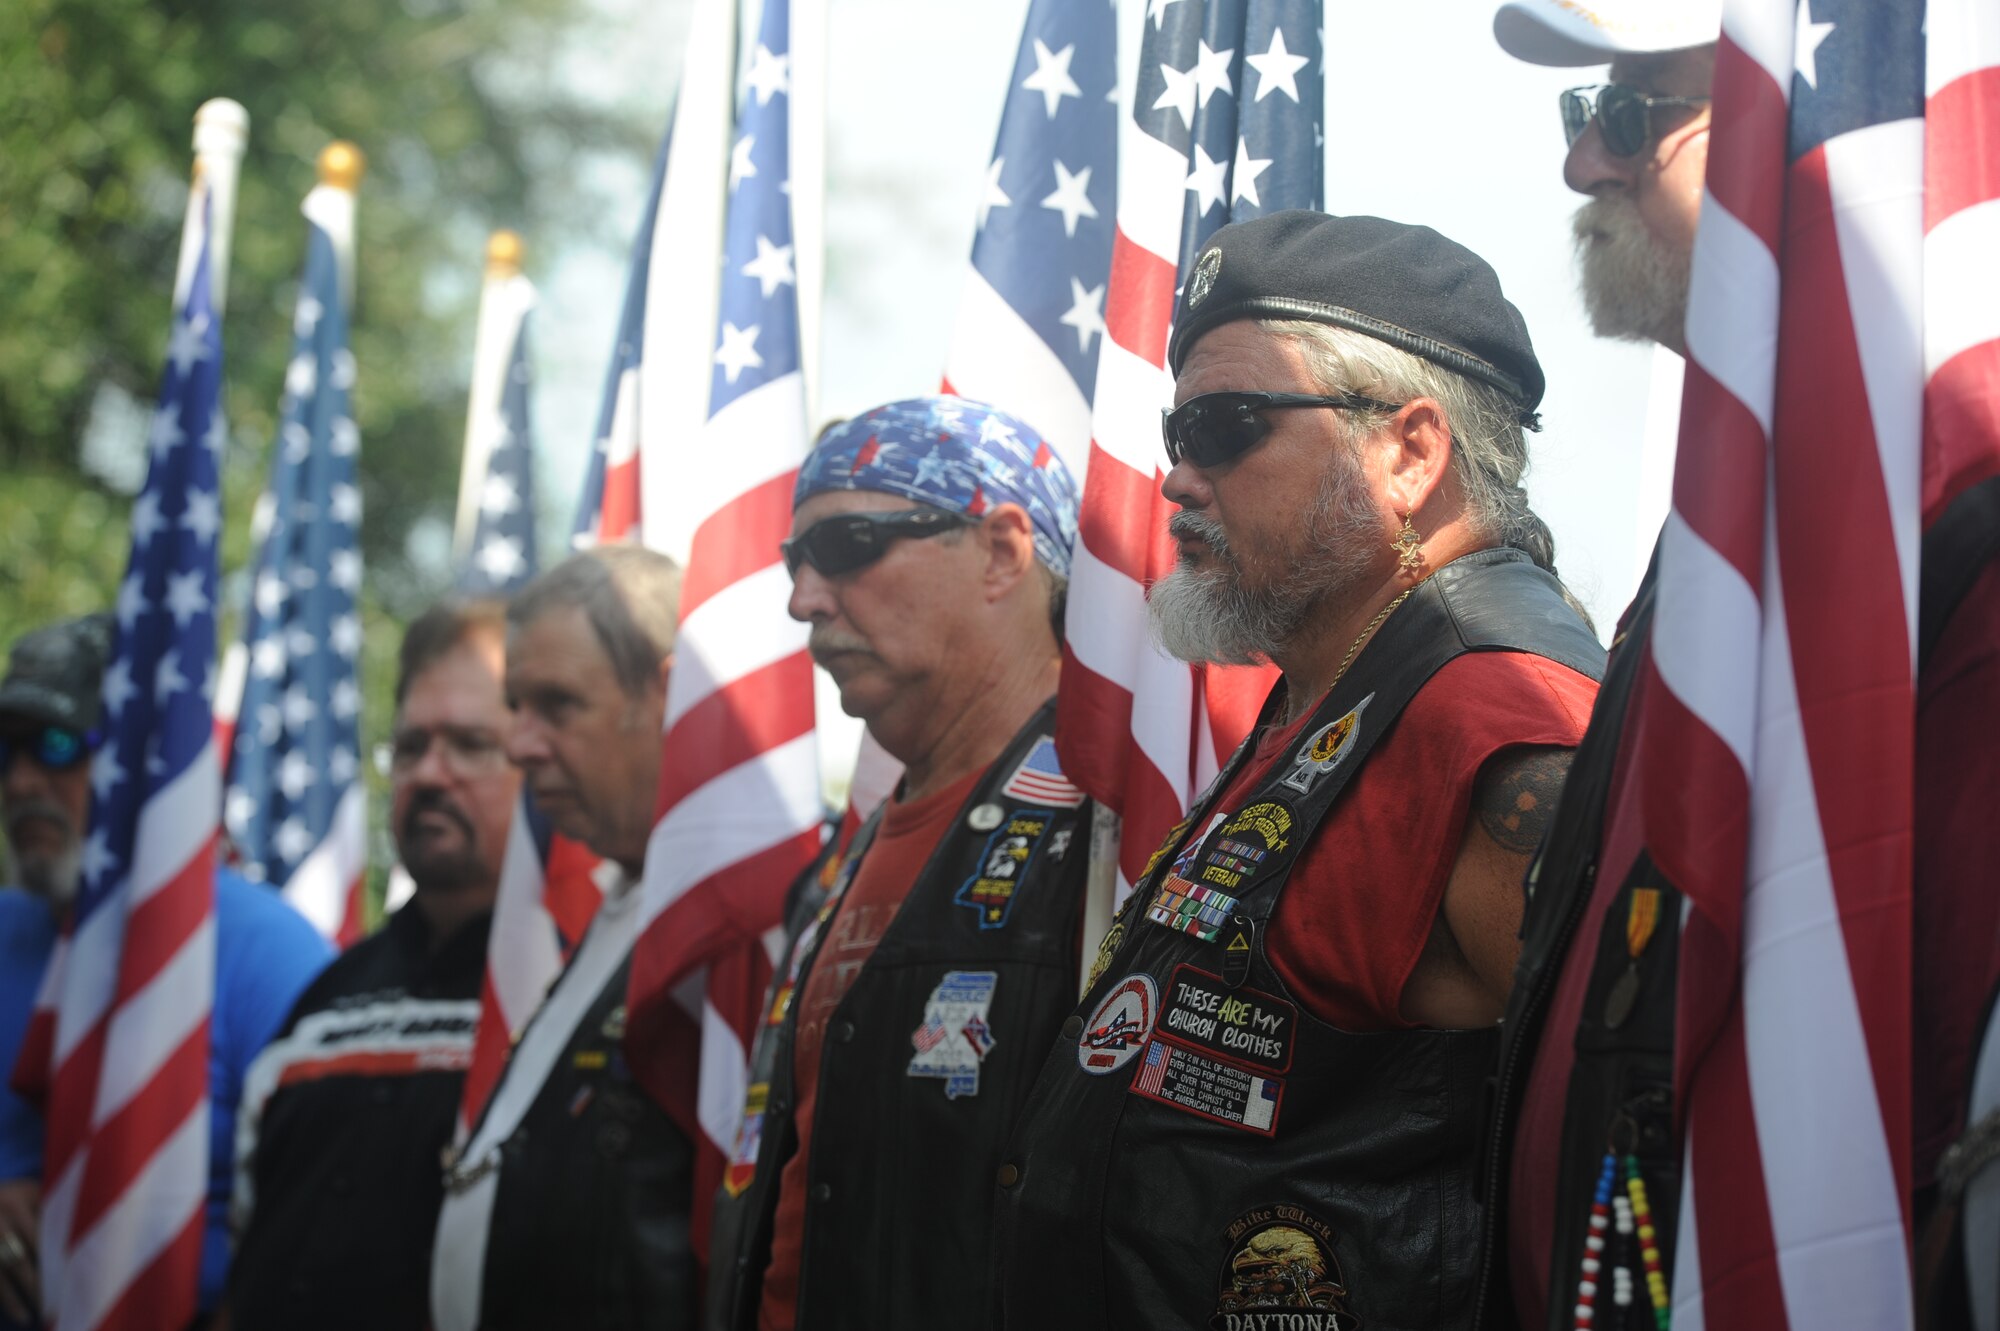 Cat Aguda and fellow members of the Combat Vet Motorcycle Association attend a Forgotten Hero ceremony for Maj. Pierre David Junod Aug. 28, 2014, at Biloxi National Cemetery. Keesler personnel, members of the American Patriot Riders, and parishioners of the Nourishing Place chapel attended the ceremony to honor Junod, who had no remaining family. Junod was a U.S. Air Force navigator during the Vietnam War. (U.S. Air Force photo by Airman 1st Class Stephan Coleman)